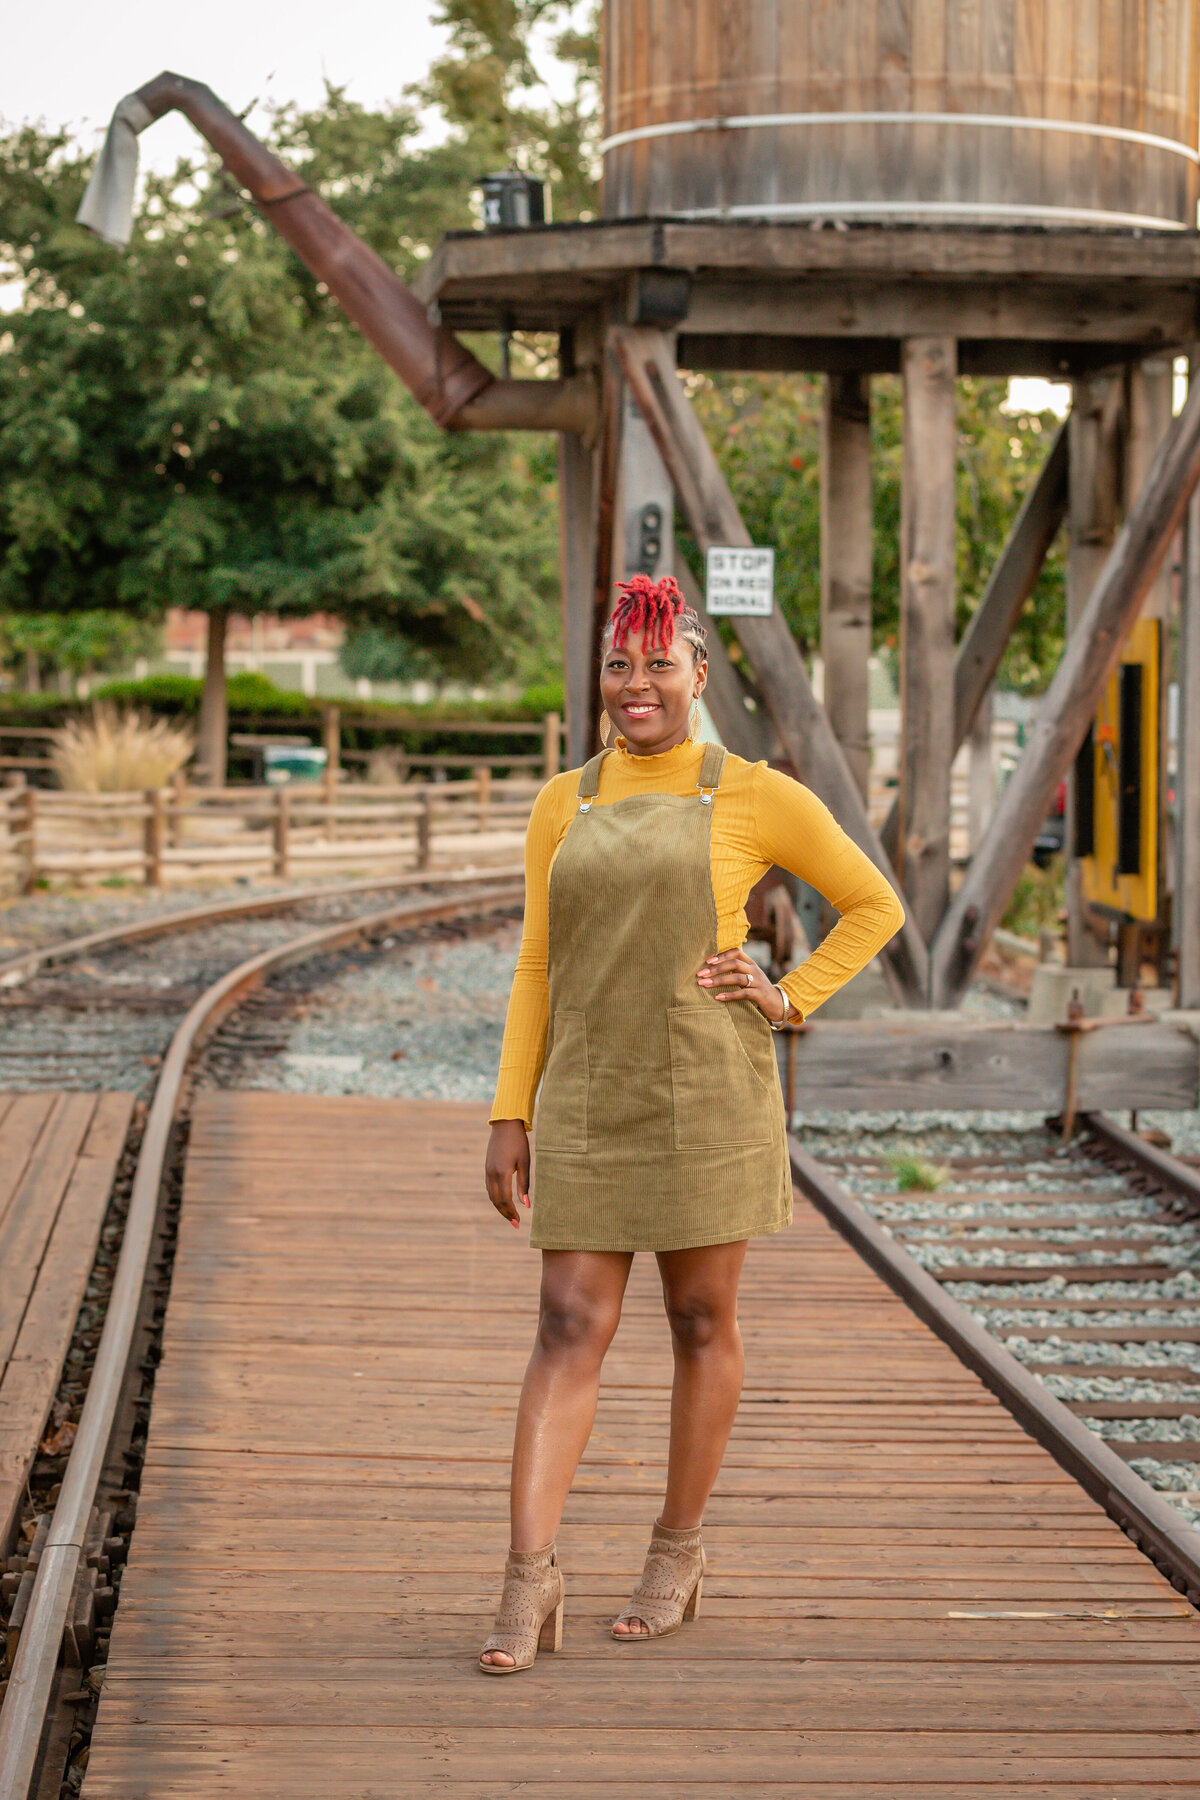 Black woman in yellow and green in front of a water tower